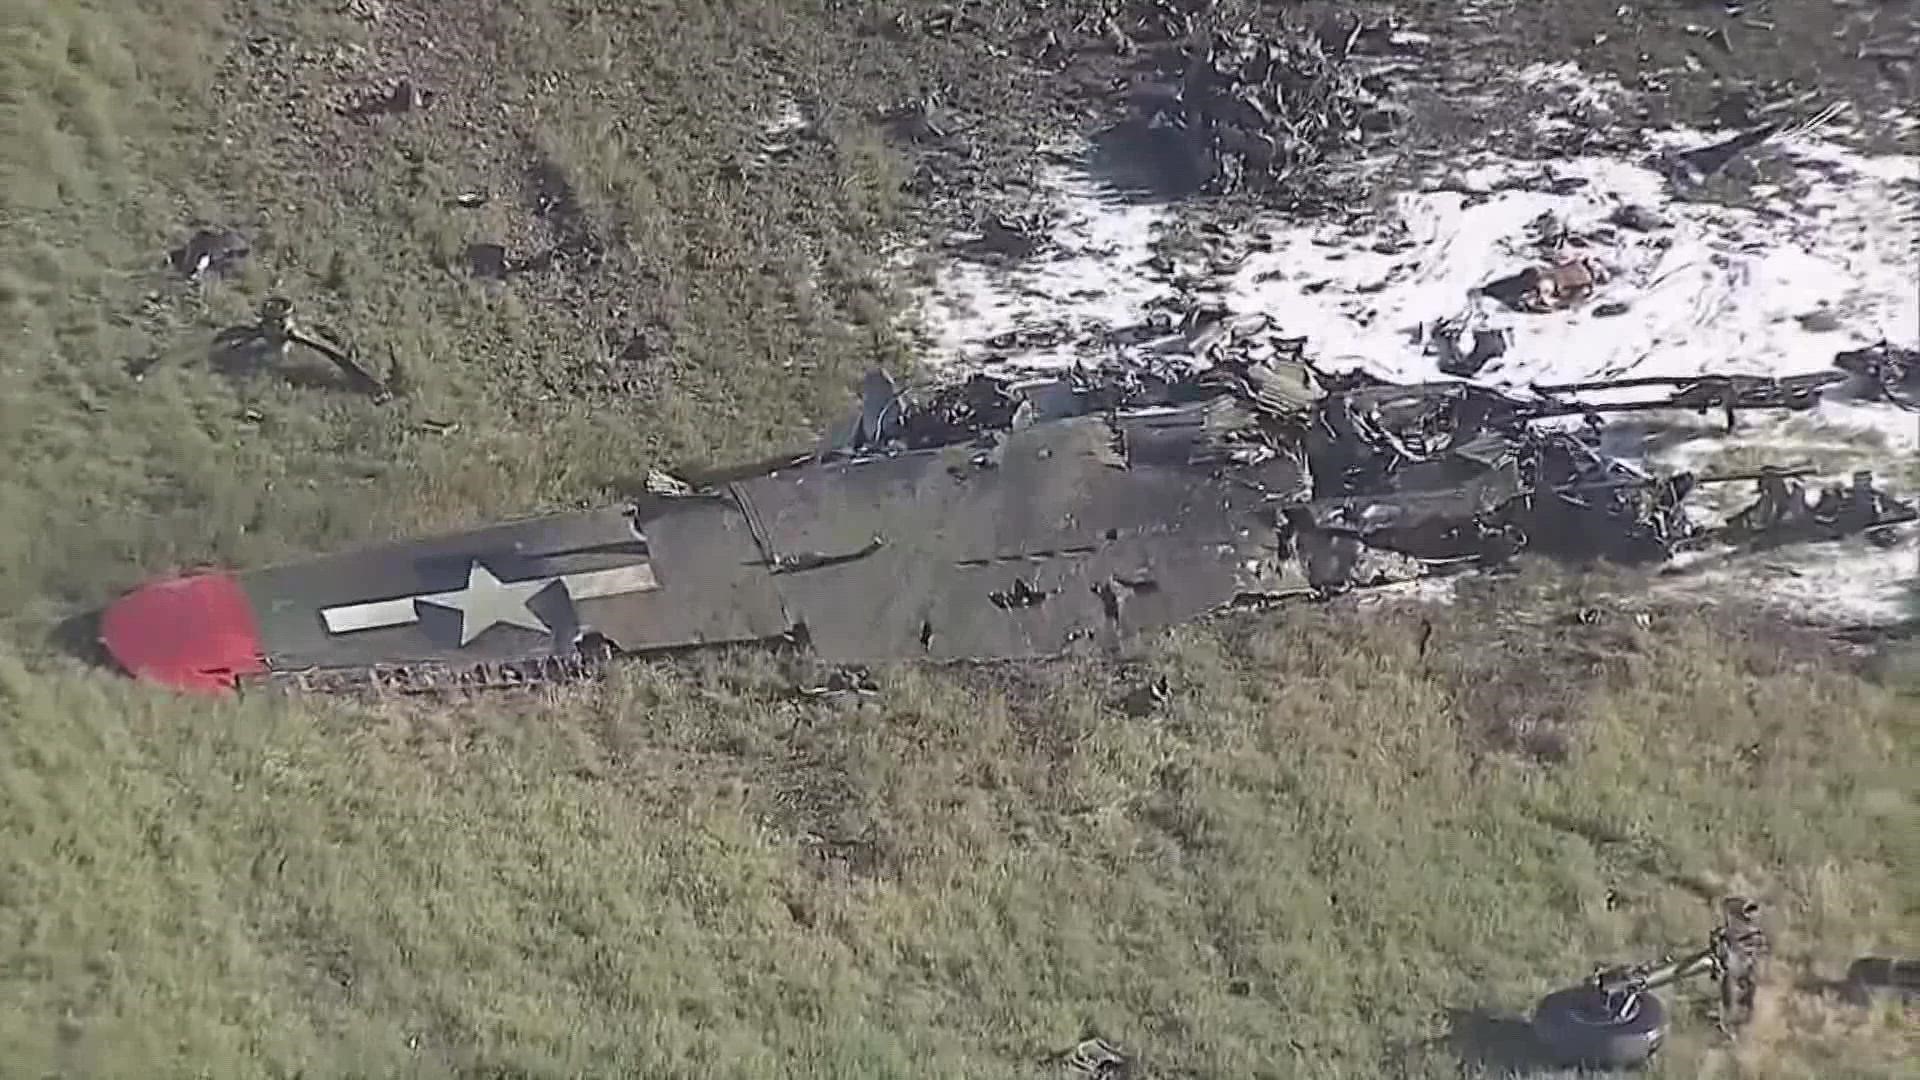 The Boeing B-17 Flying Fortress and a Bell P-63 Kingcobra collided and crashed around 1:20 p.m., the Federal Aviation Administration said in a statement.